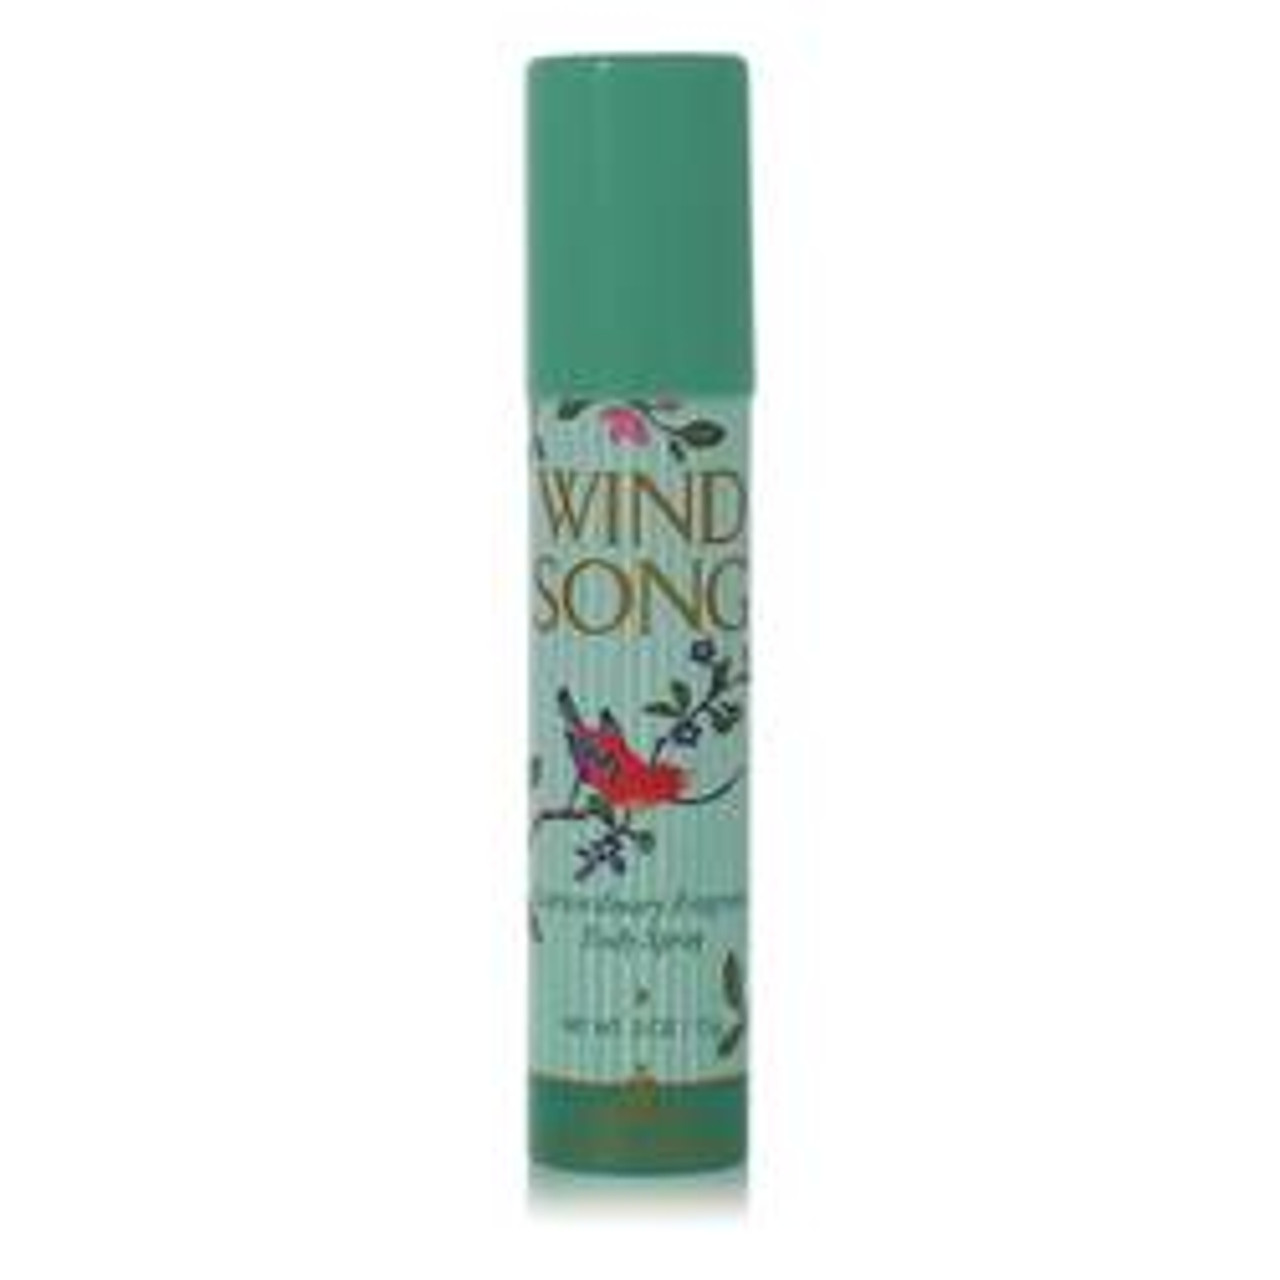 Wind Song Perfume By Prince Matchabelli Body Spray 0.5 oz for Women - [From 11.00 - Choose pk Qty ] - *Ships from Miami